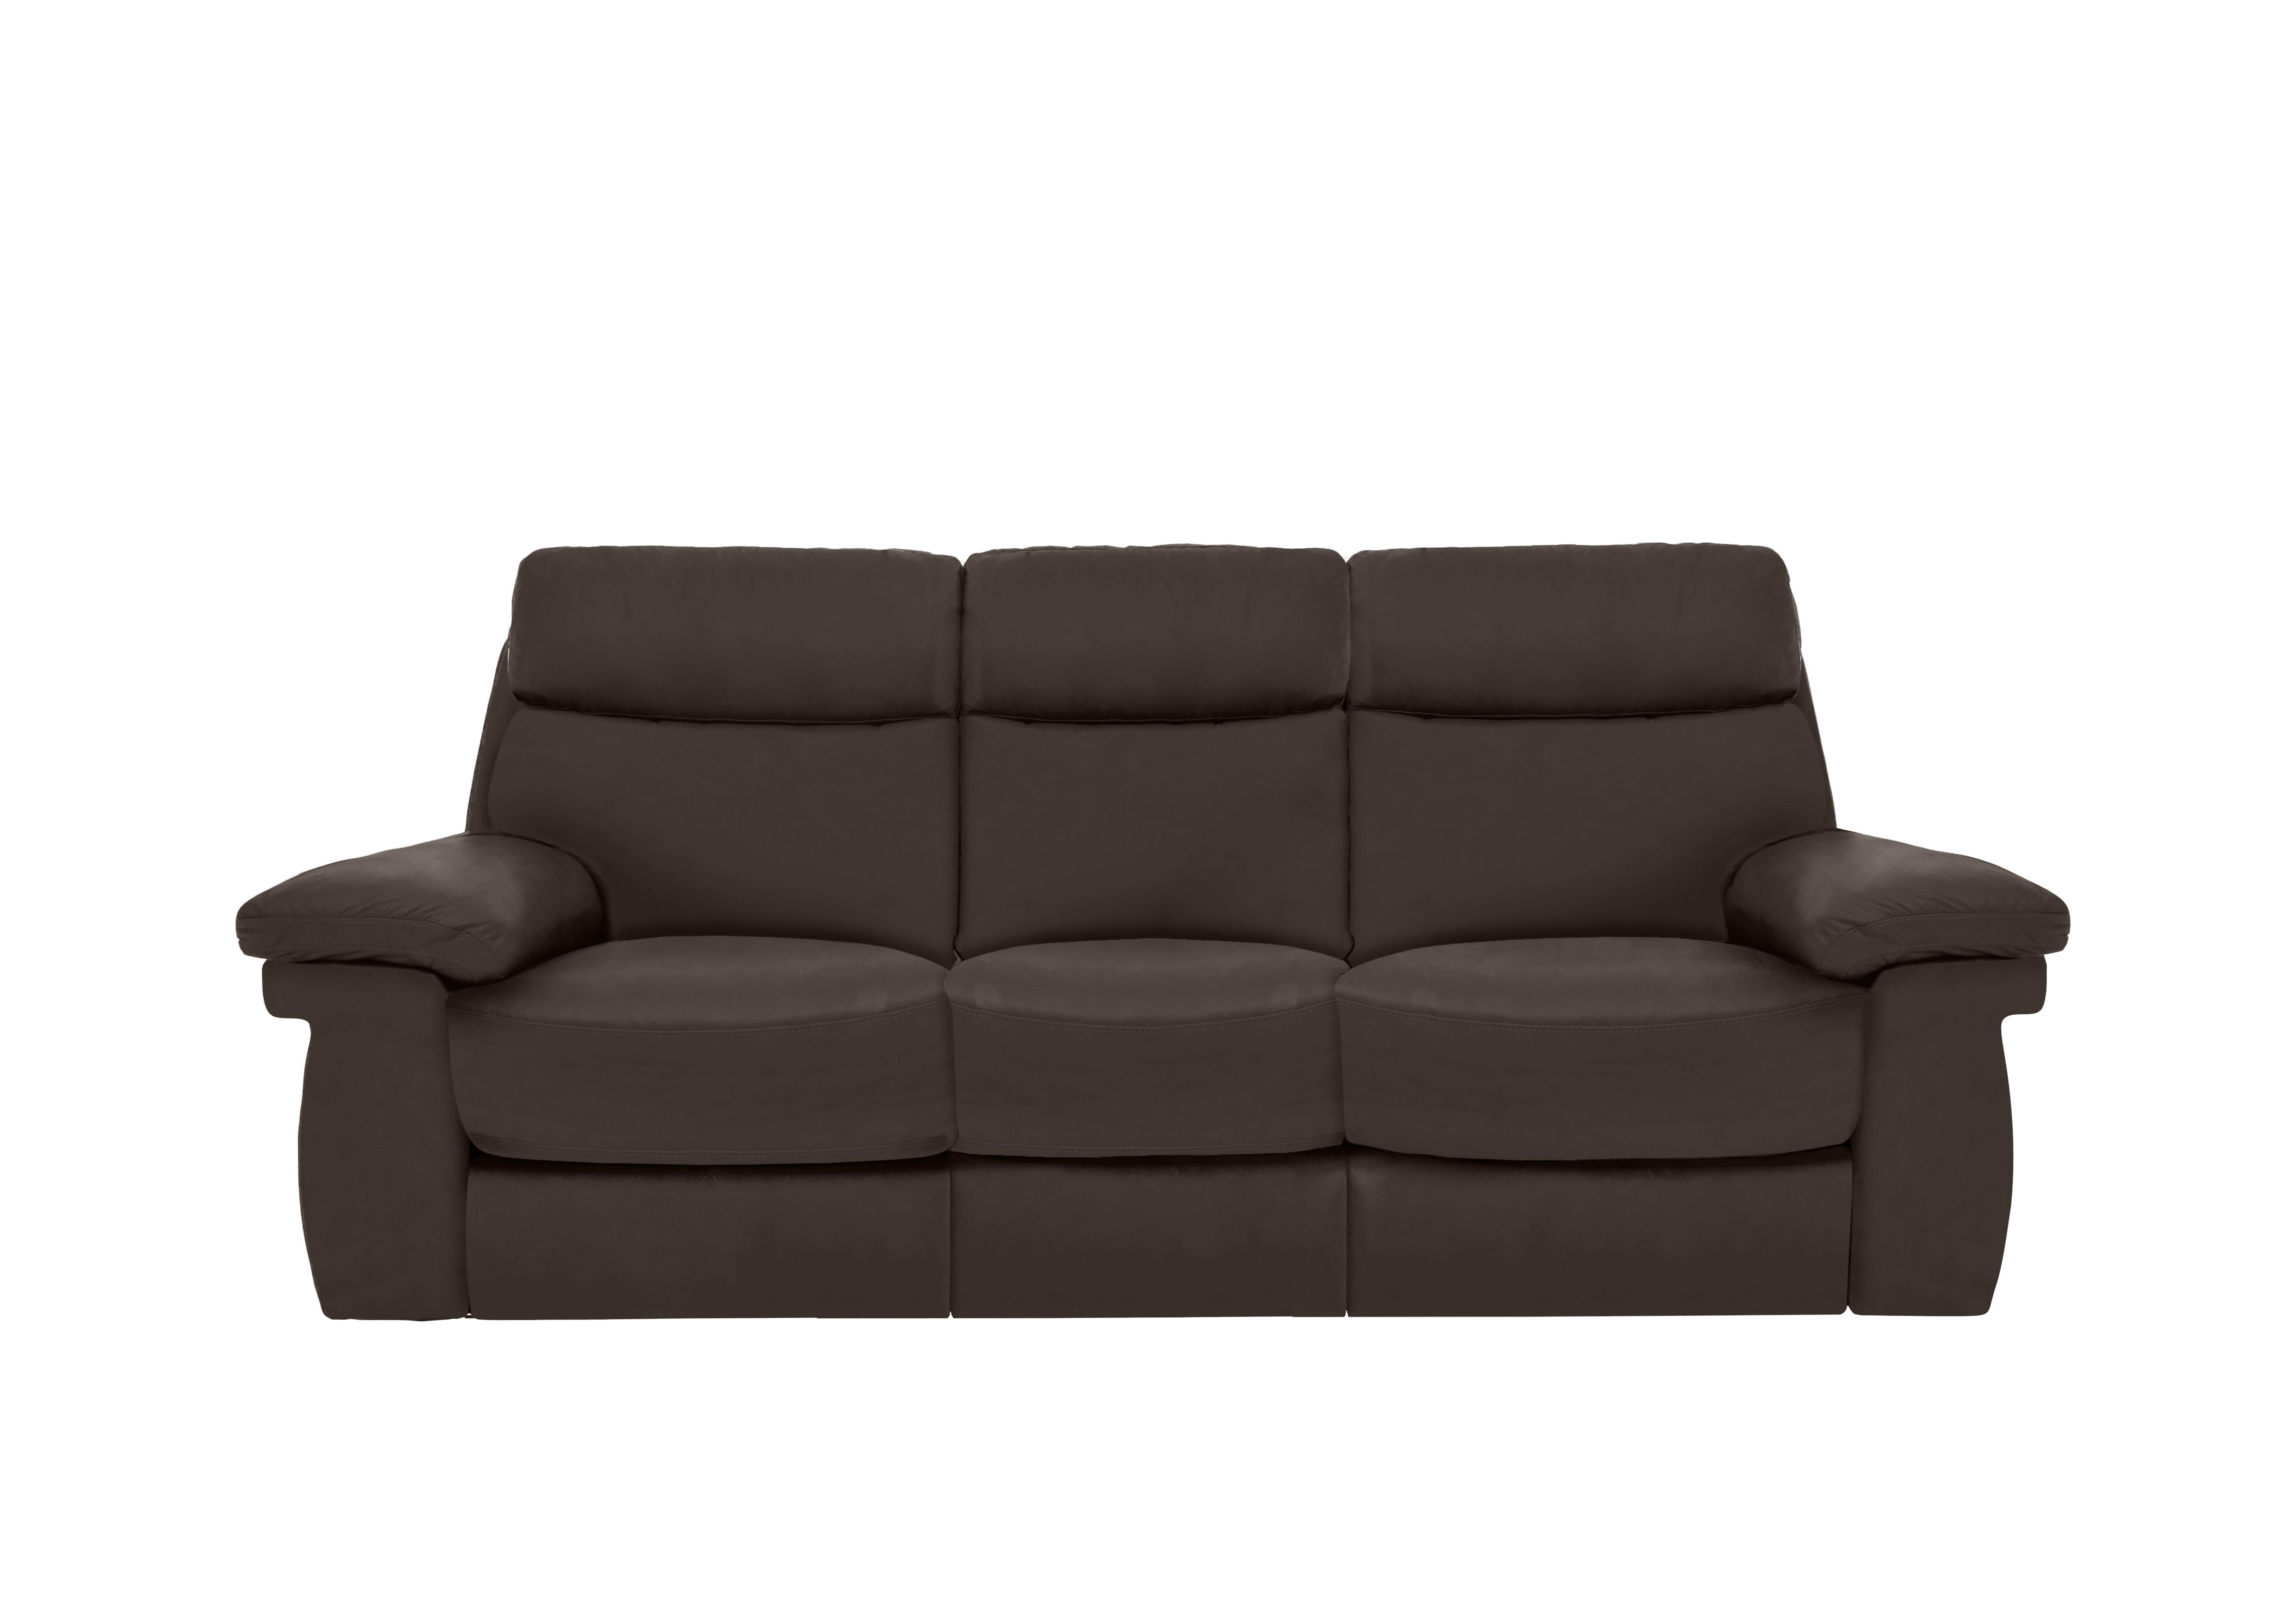 Serene 3 Seater Leather Power Recliner Sofa with Drop Down Table in Bx-037c Walnut on Furniture Village